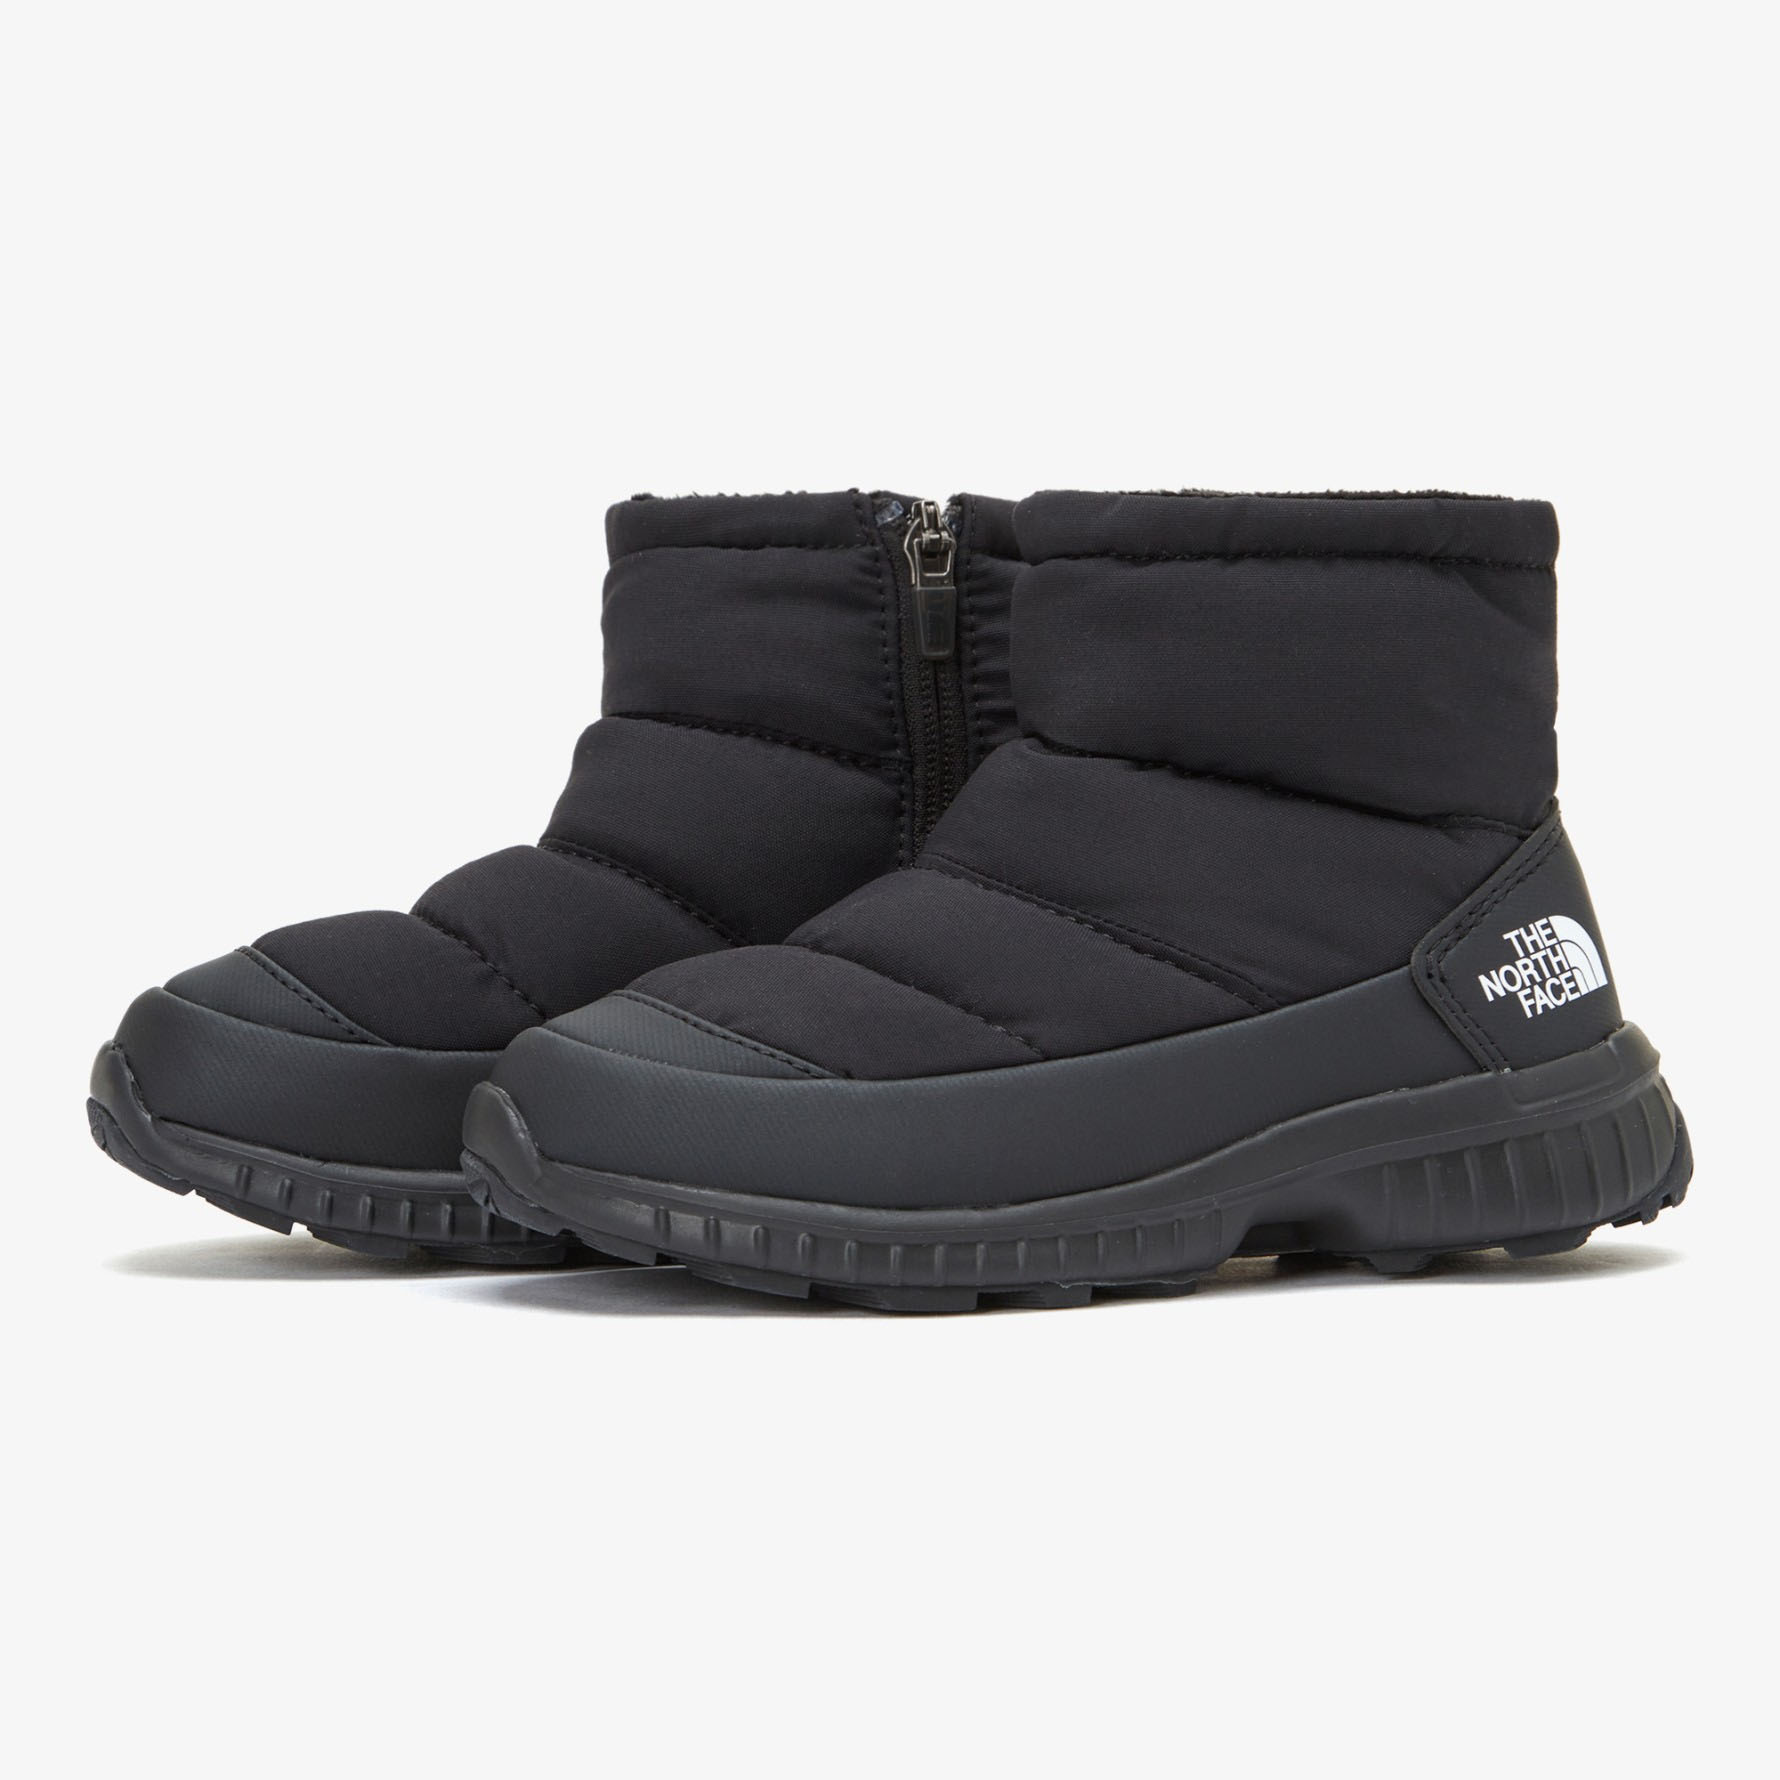 THE NORTH FACE ノースフェイス キッズ ショートブーツ KIDS BOOTIE SHO...